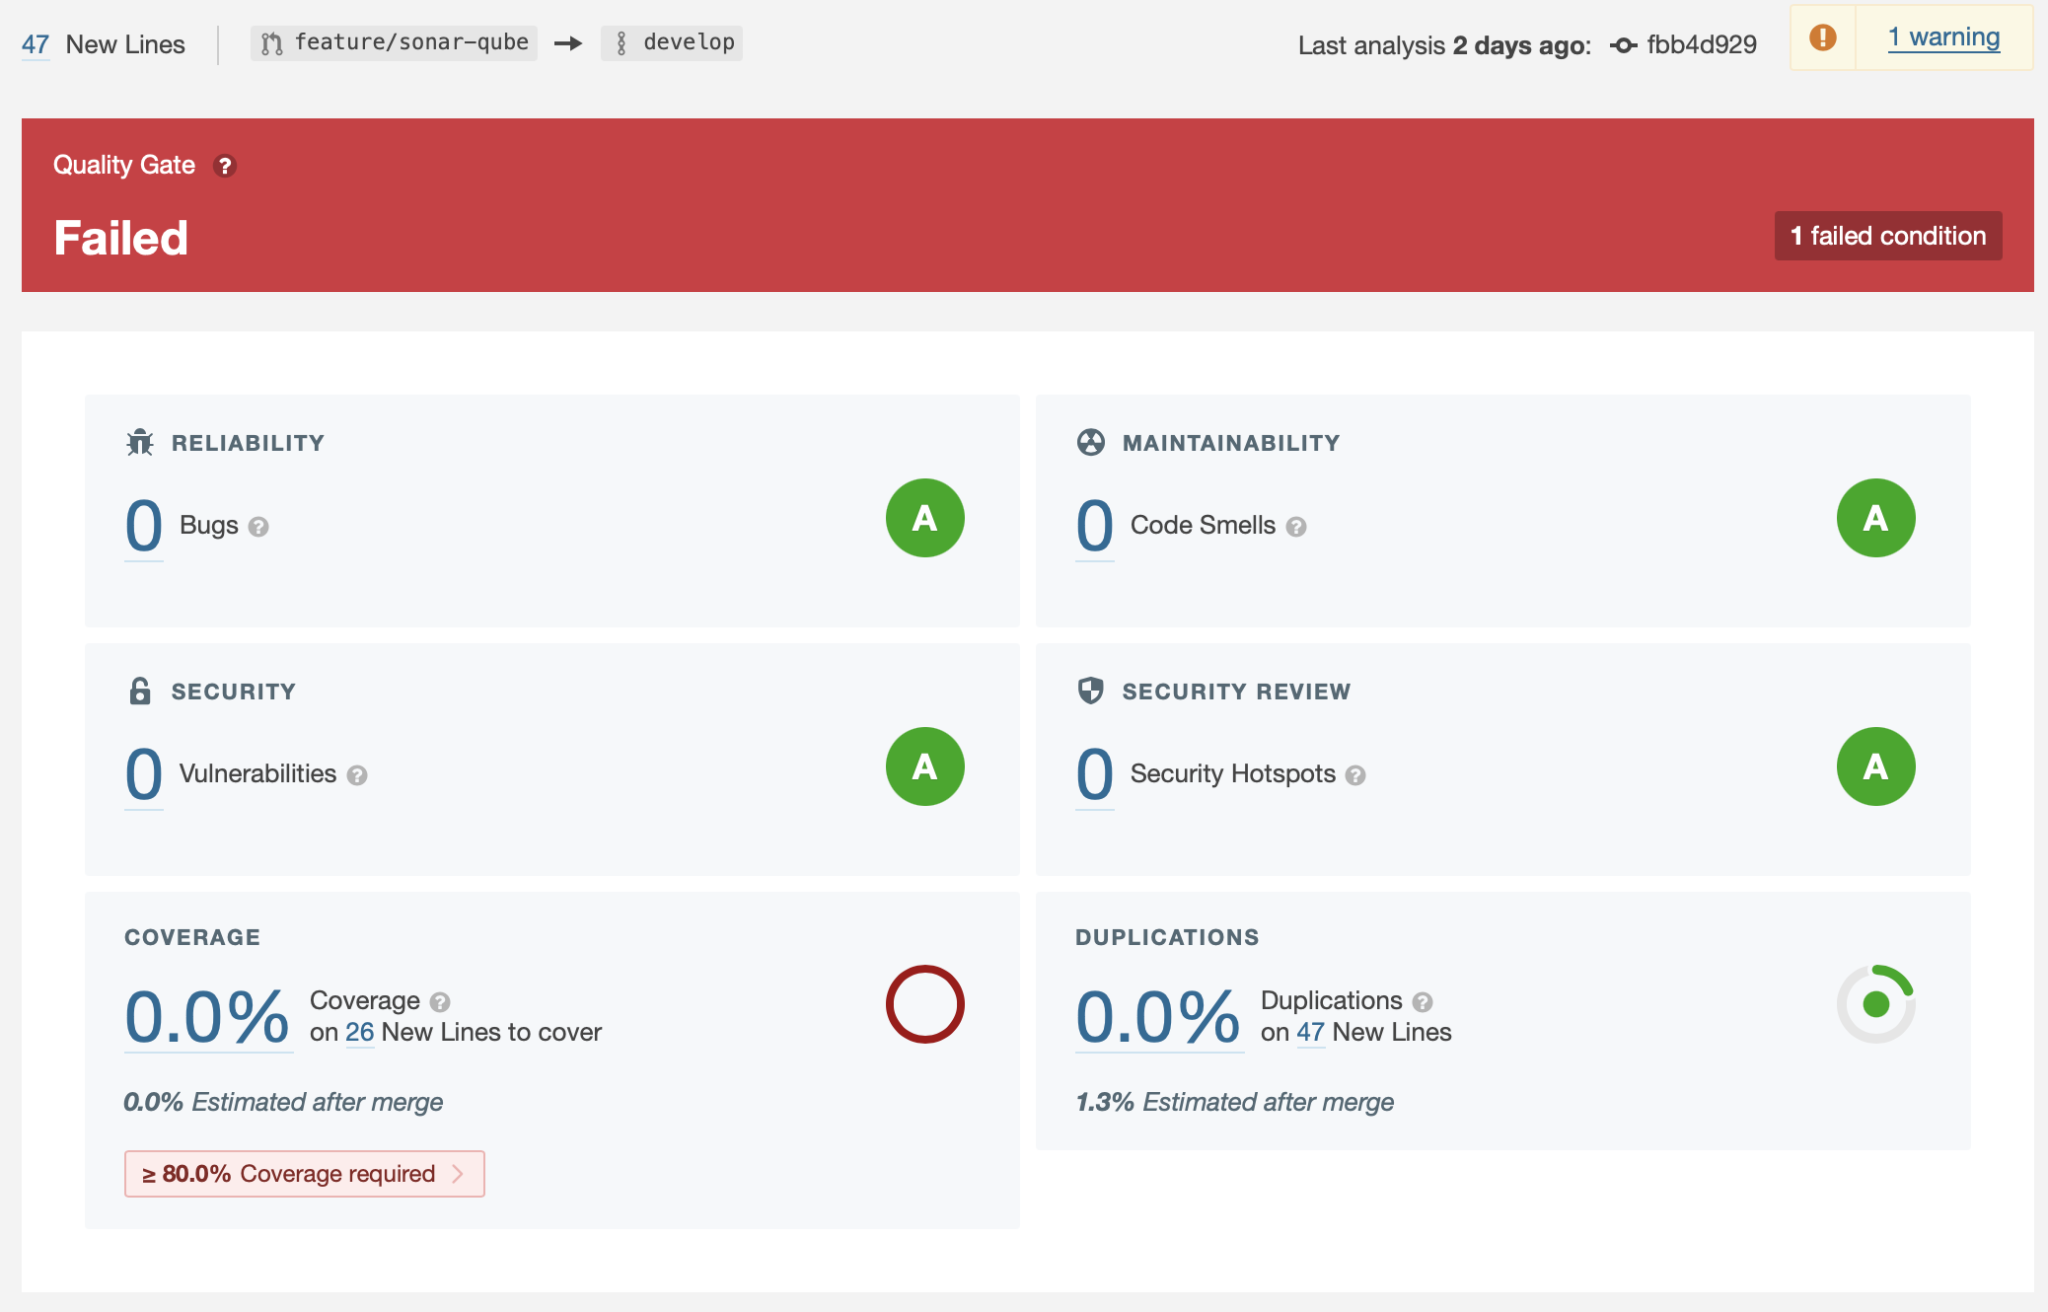 SonarQube report. 47 new lines. From branch feature/sonar-qube to develop. Last analysis 2 days ago, commit ID fbb4d929. 1 warning. Quality gate failed. 1 failed condition. Reliability: 0 bugs. Maintainability: 0 code smells. Security: 0 vulnerabilities. Security Review: 0 security hotspots. Coverage: 0.0% coverage on 26 new lines to cover. 0.0% estimated after merge. Duplications 0.0% duplications on 47 new lines. 1.3% estimated after merge.